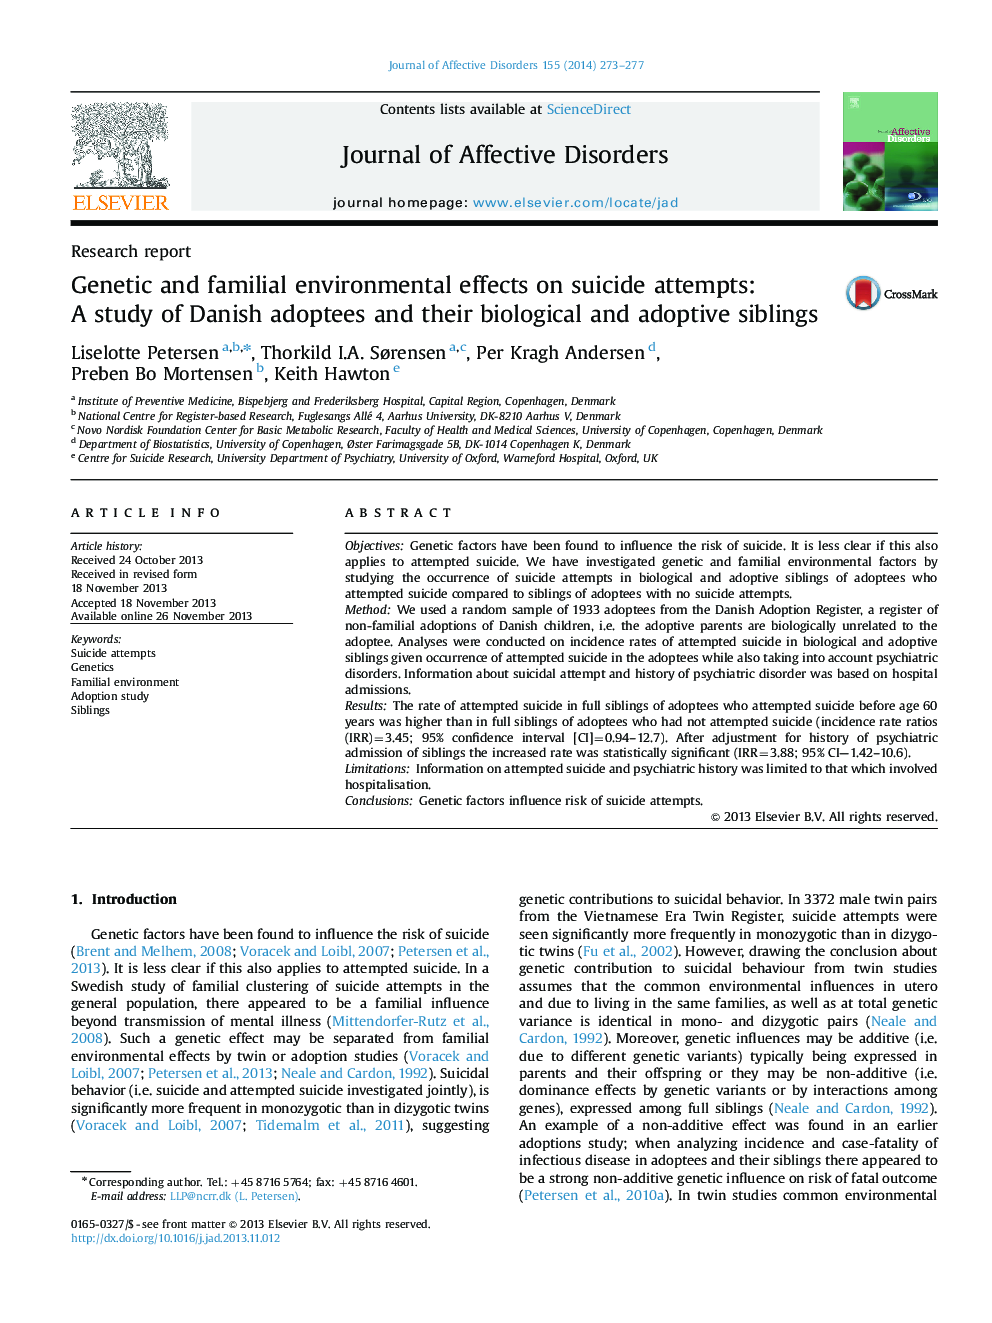 Genetic and familial environmental effects on suicide attempts: A study of Danish adoptees and their biological and adoptive siblings